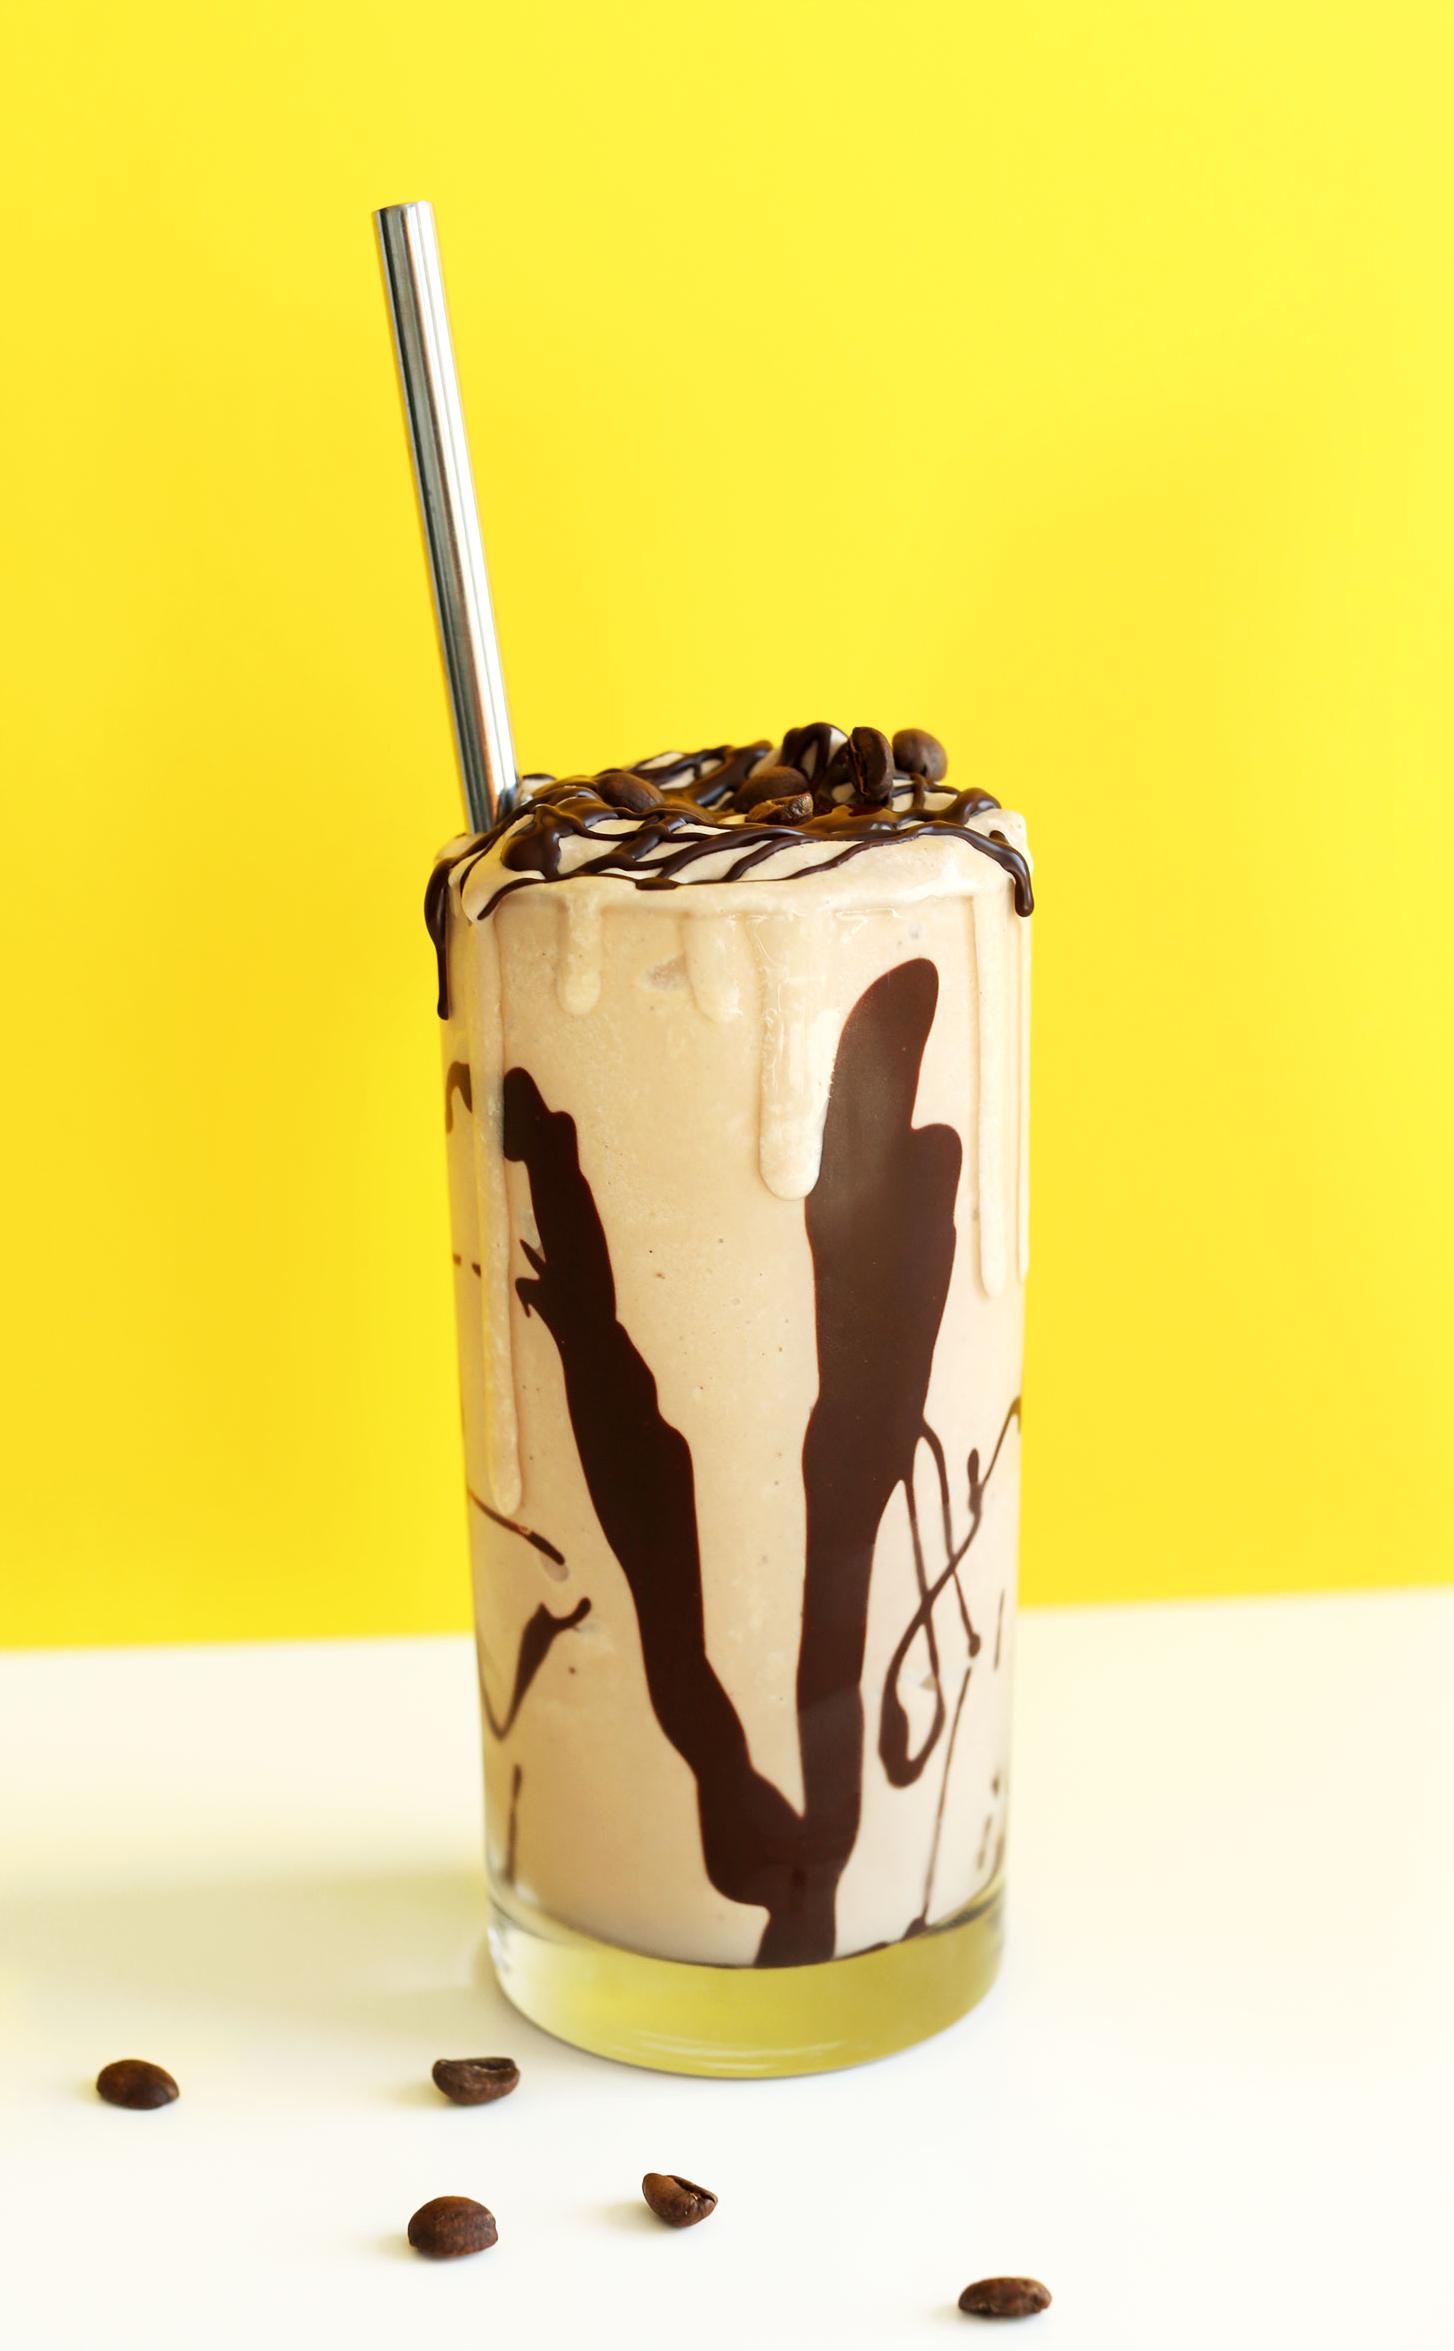  Cooling off never tasted this good - Mocha Shake, anyone?